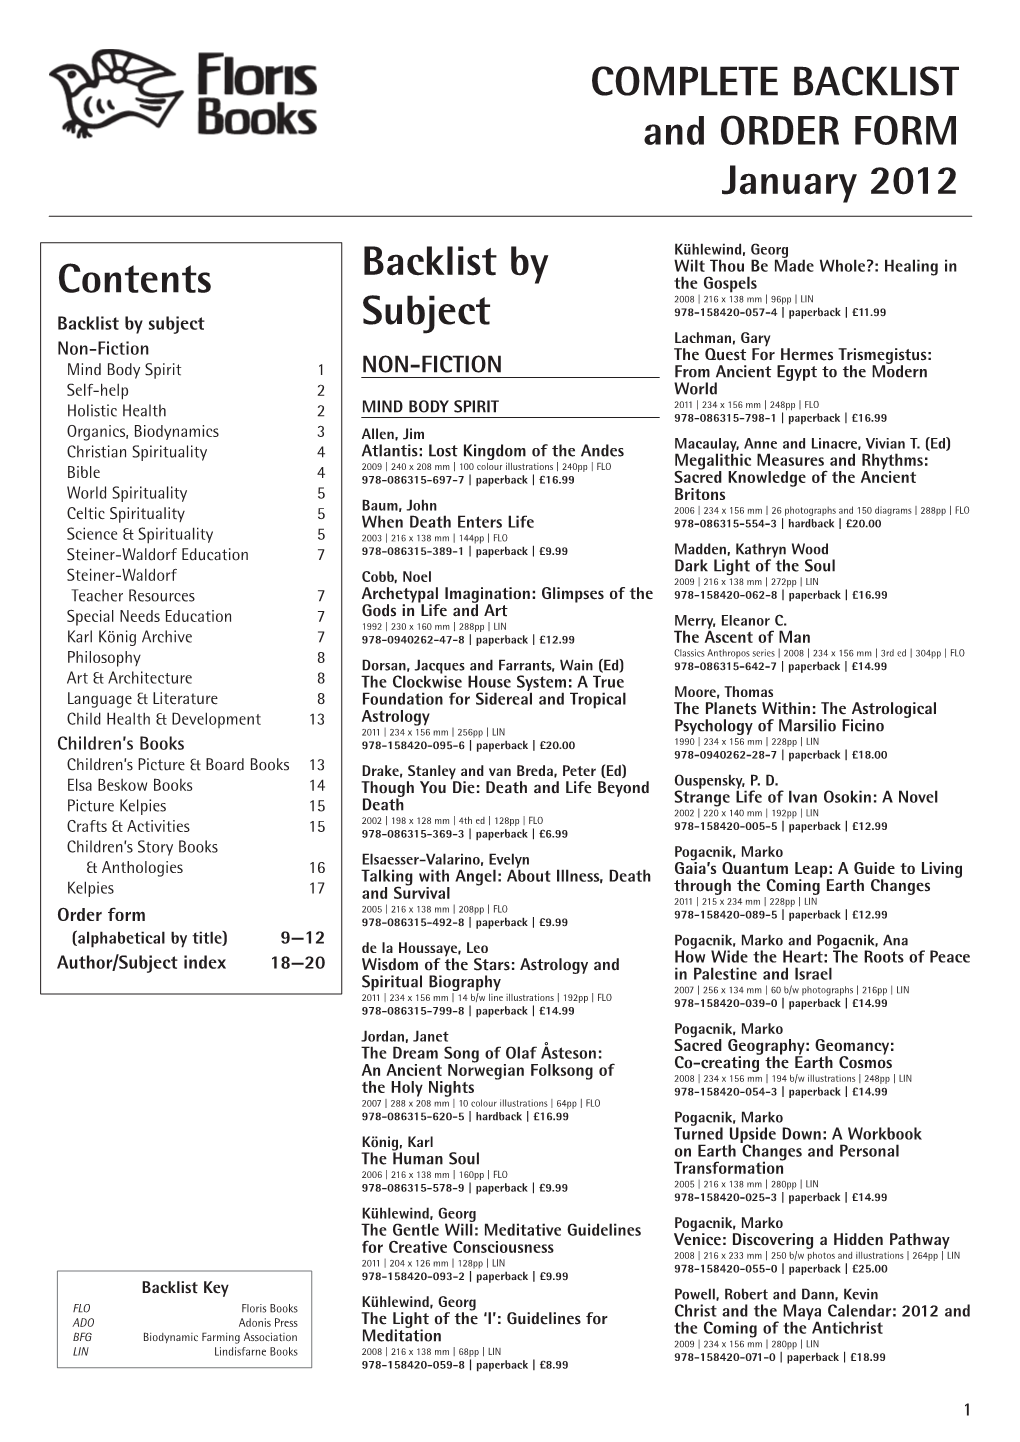 COMPLETE BACKLIST and ORDER FORM January 2012